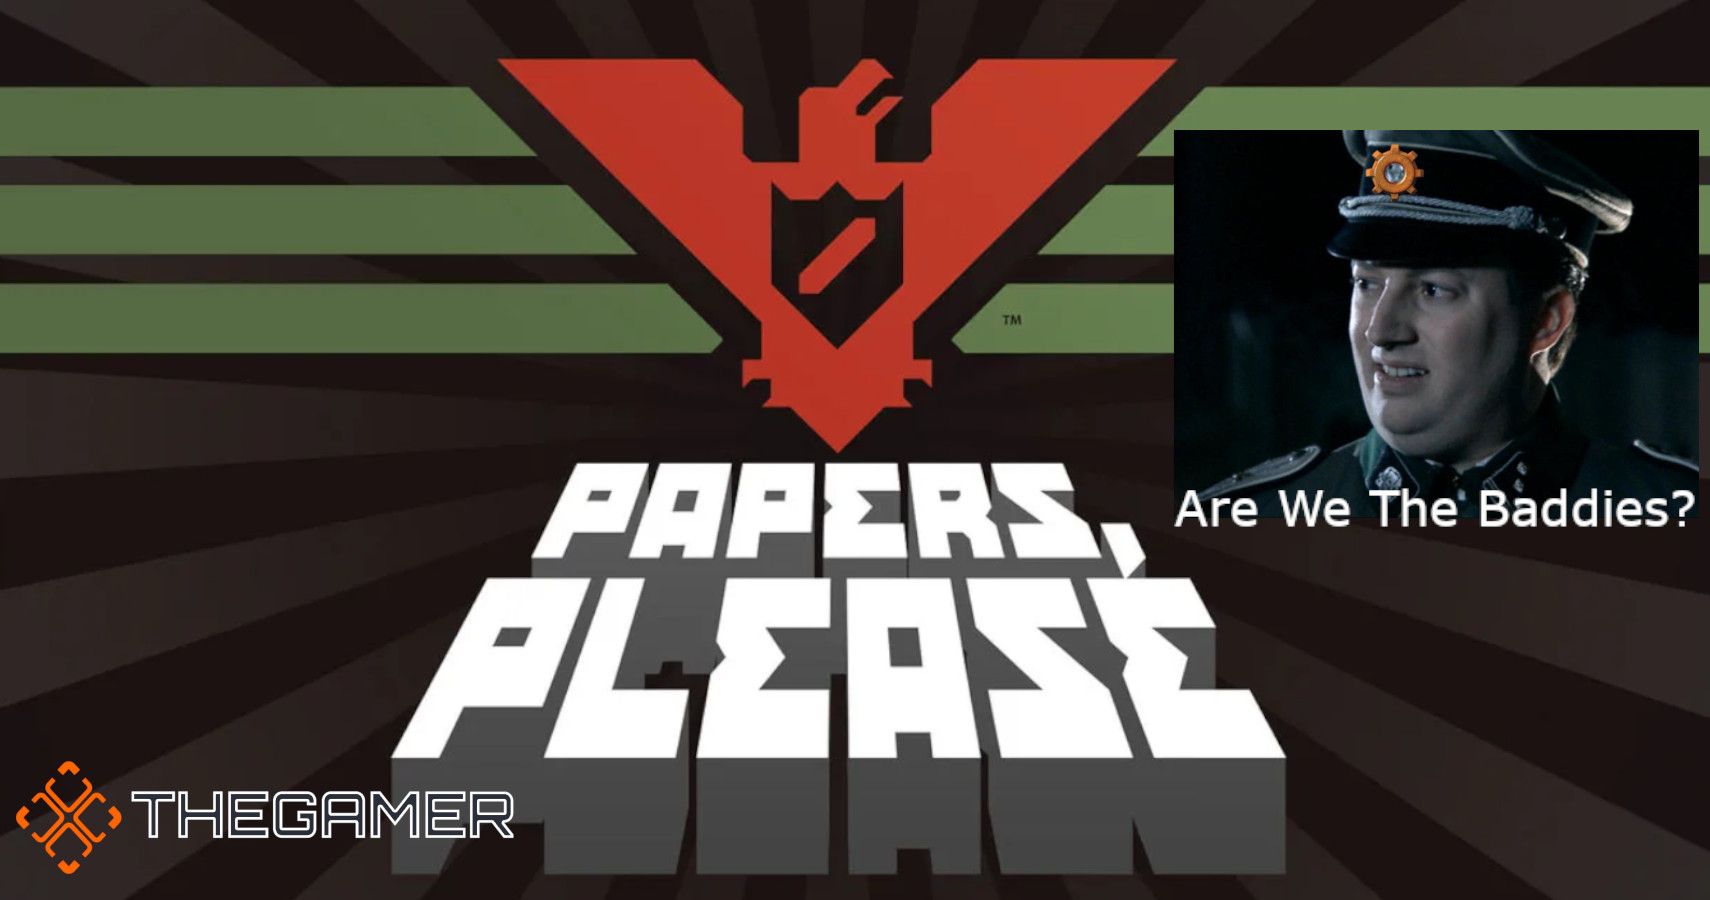 the logo for papers please alongside the are we the baddies meme